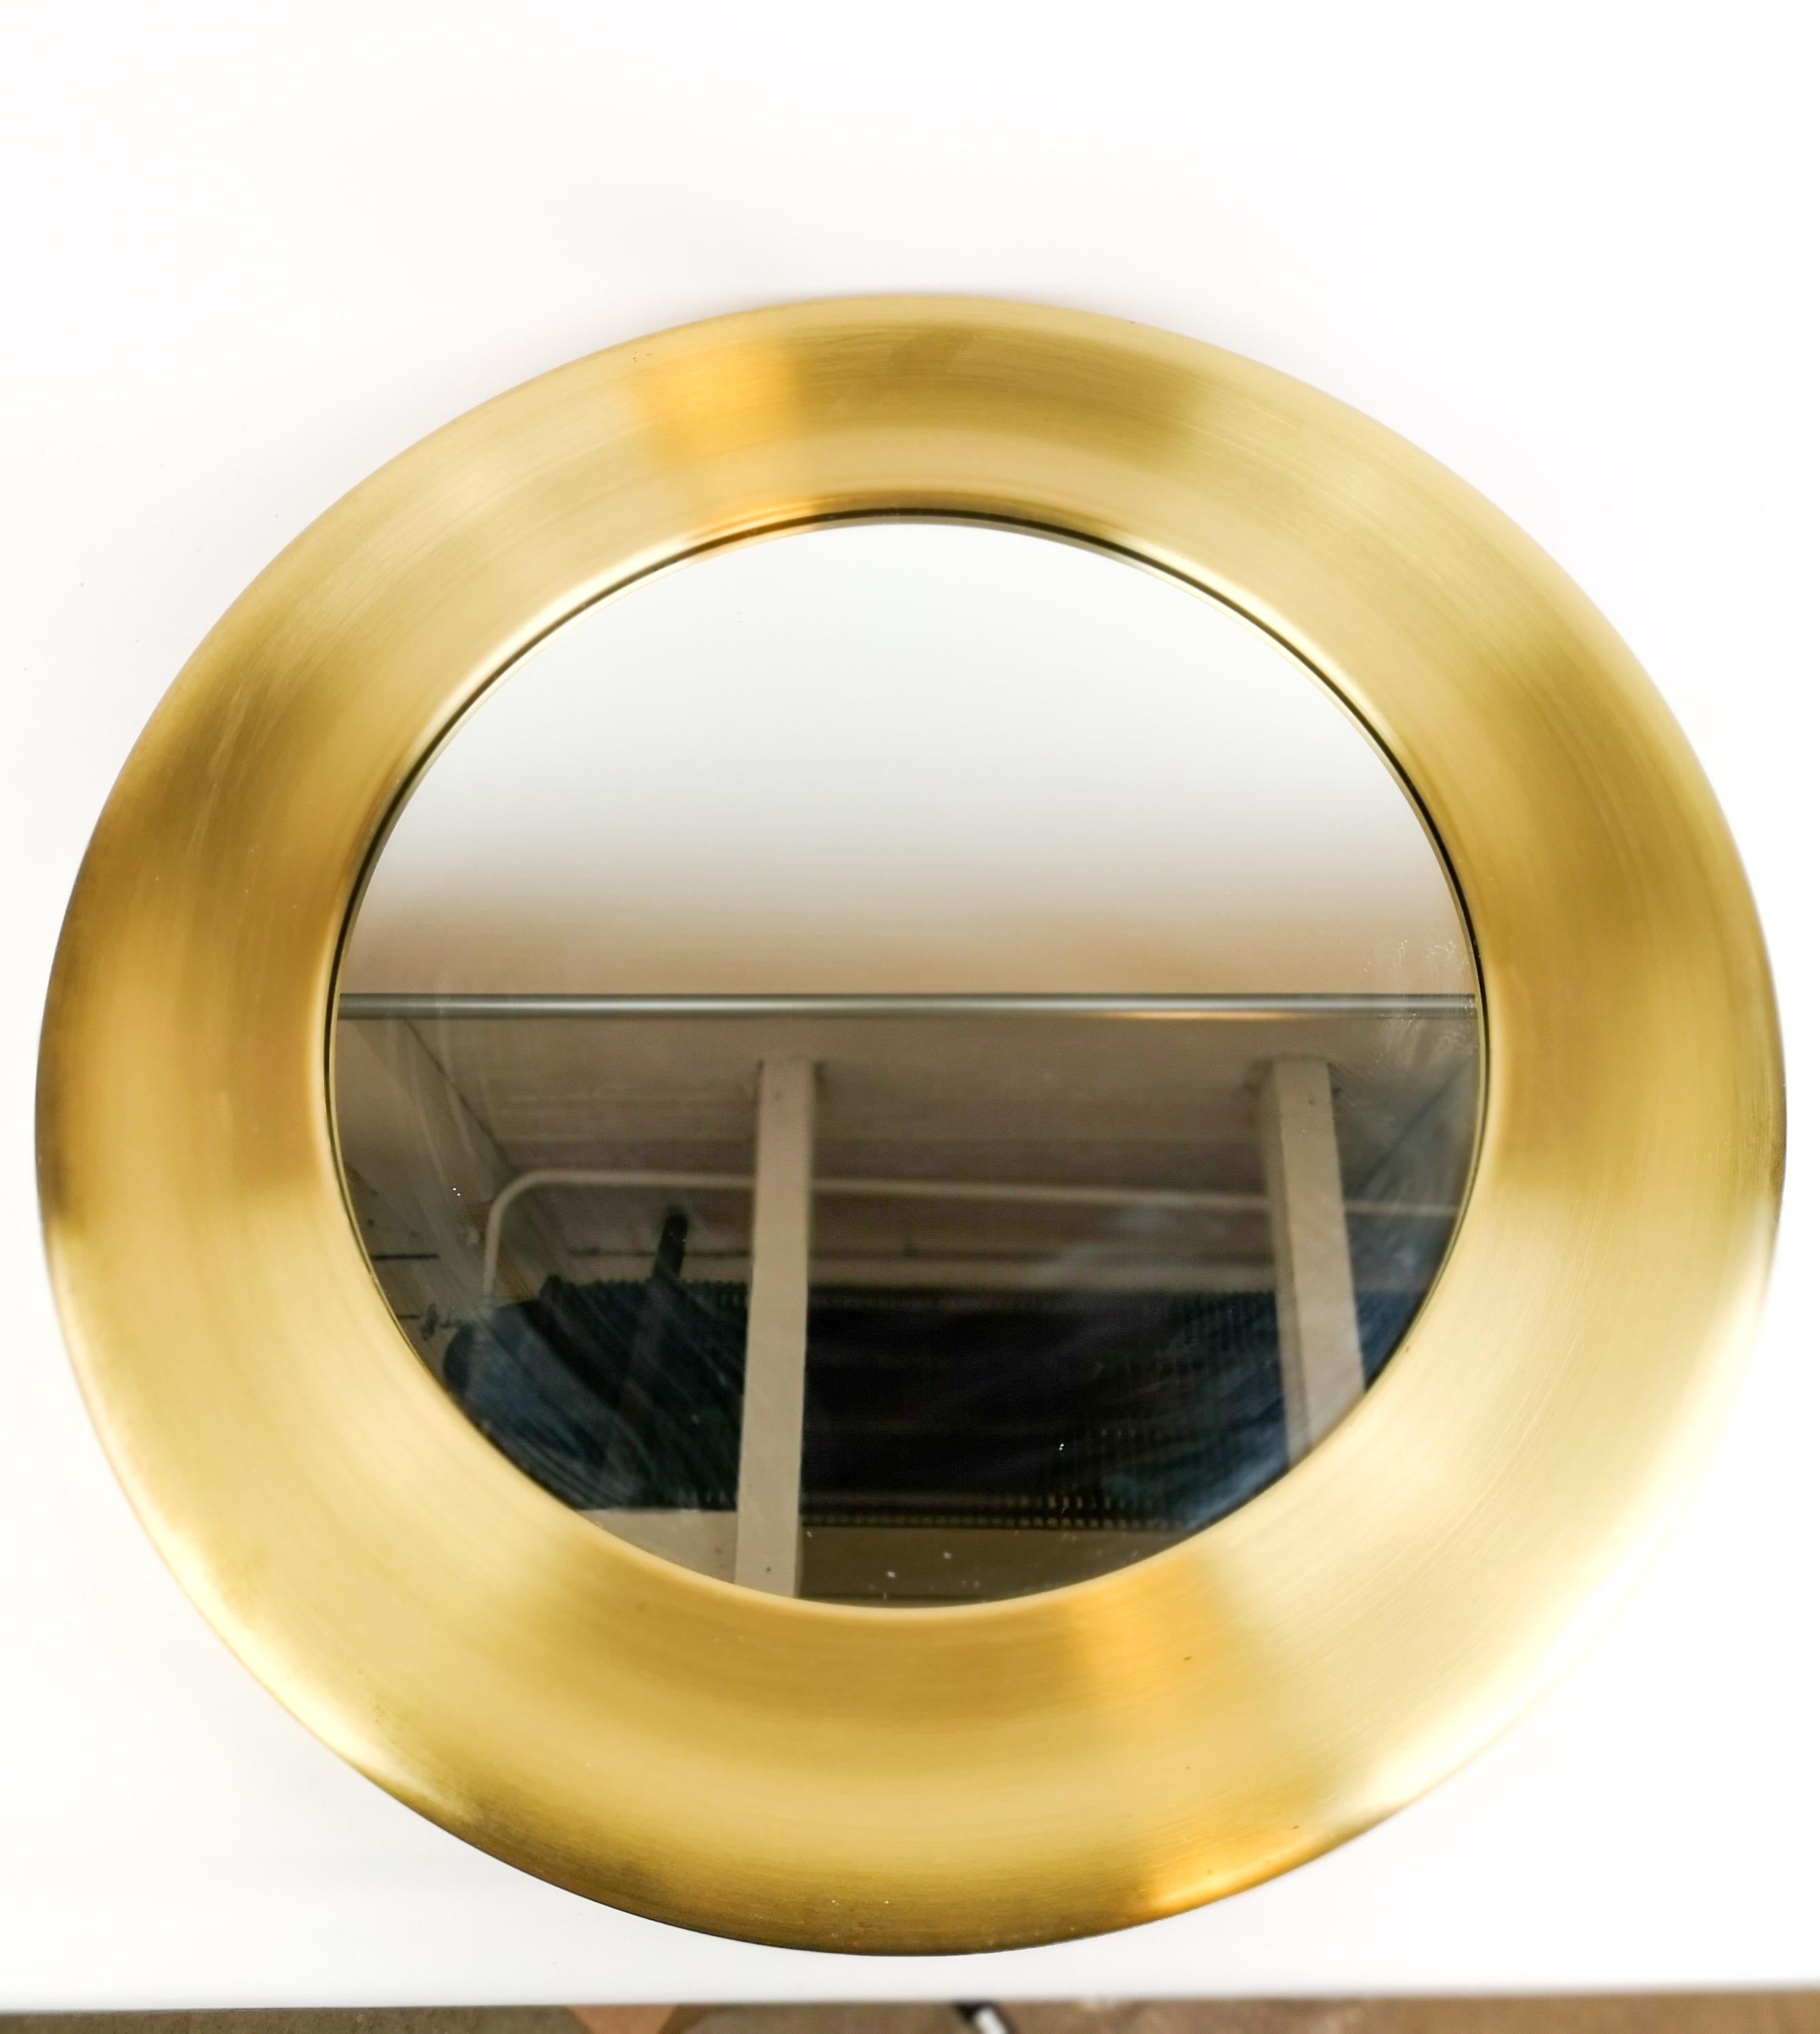 Round glass mirror from Glasmäster with brass frame. It was made in Sweden for Glasmäster (glass master) in Markaryd and is often connected to Hans Agne Jakobsons Work in Markaryd.

This mirror is in good condition, one small bump and some stains